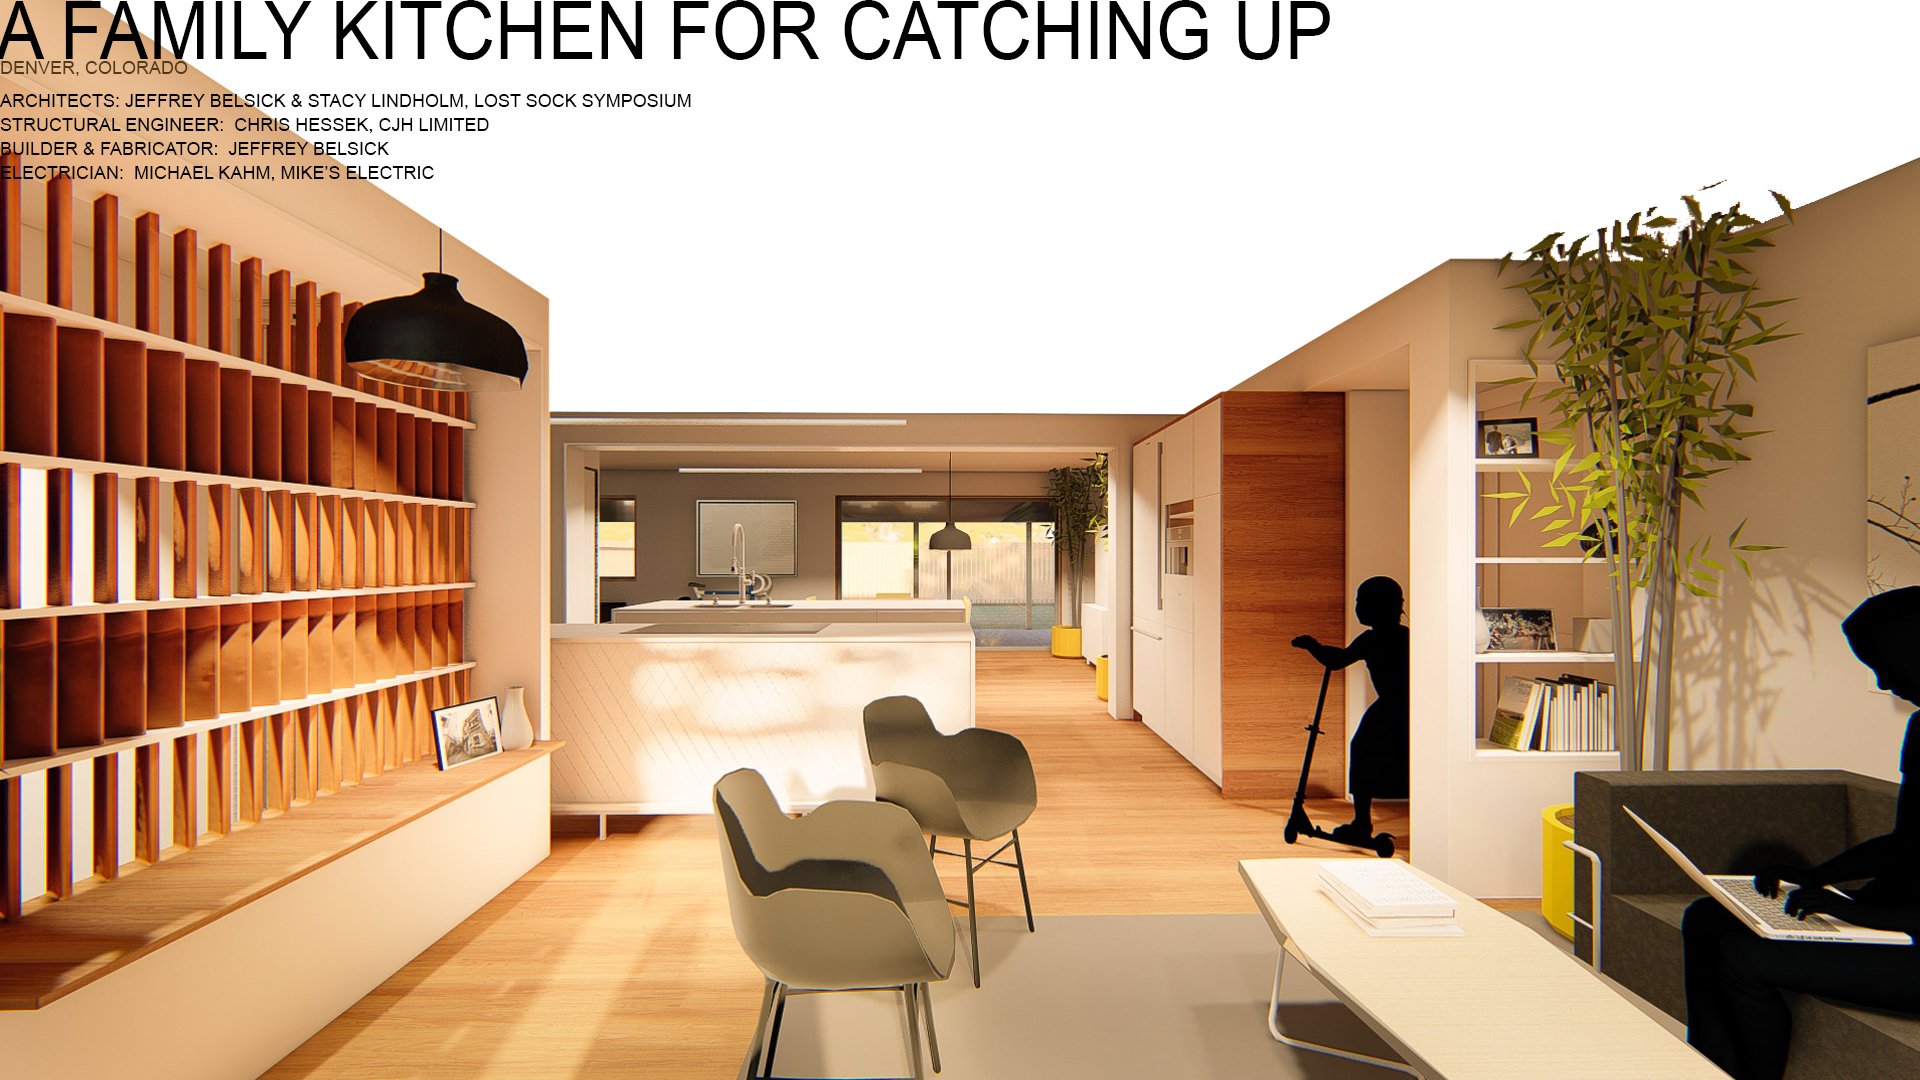 A FAMILY KITCHEN FOR CATCHING UP